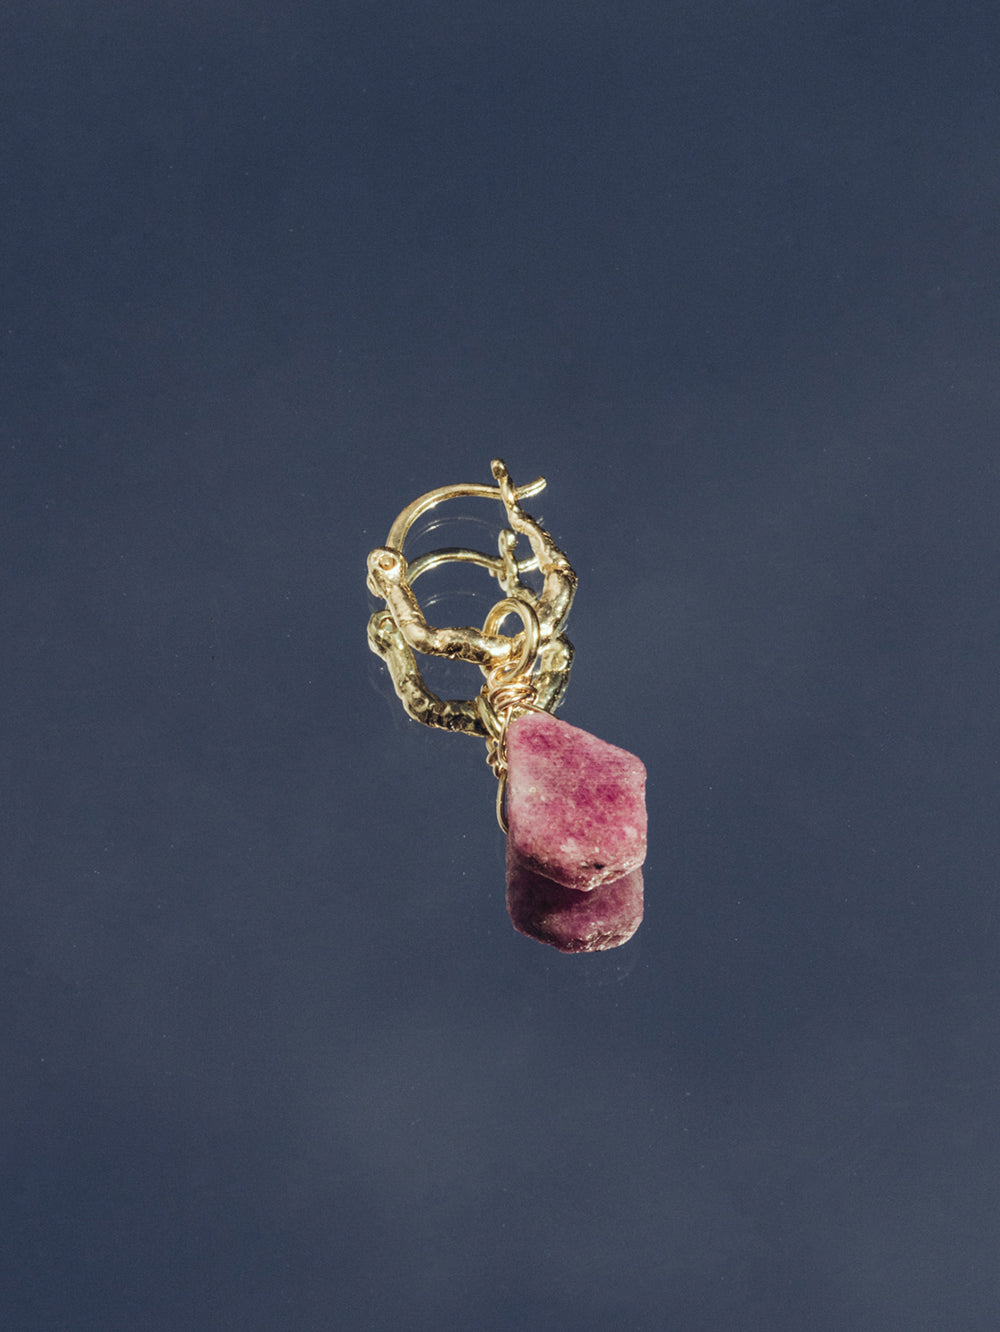 Sunny soldier - Ruby | 14K Gold Plated